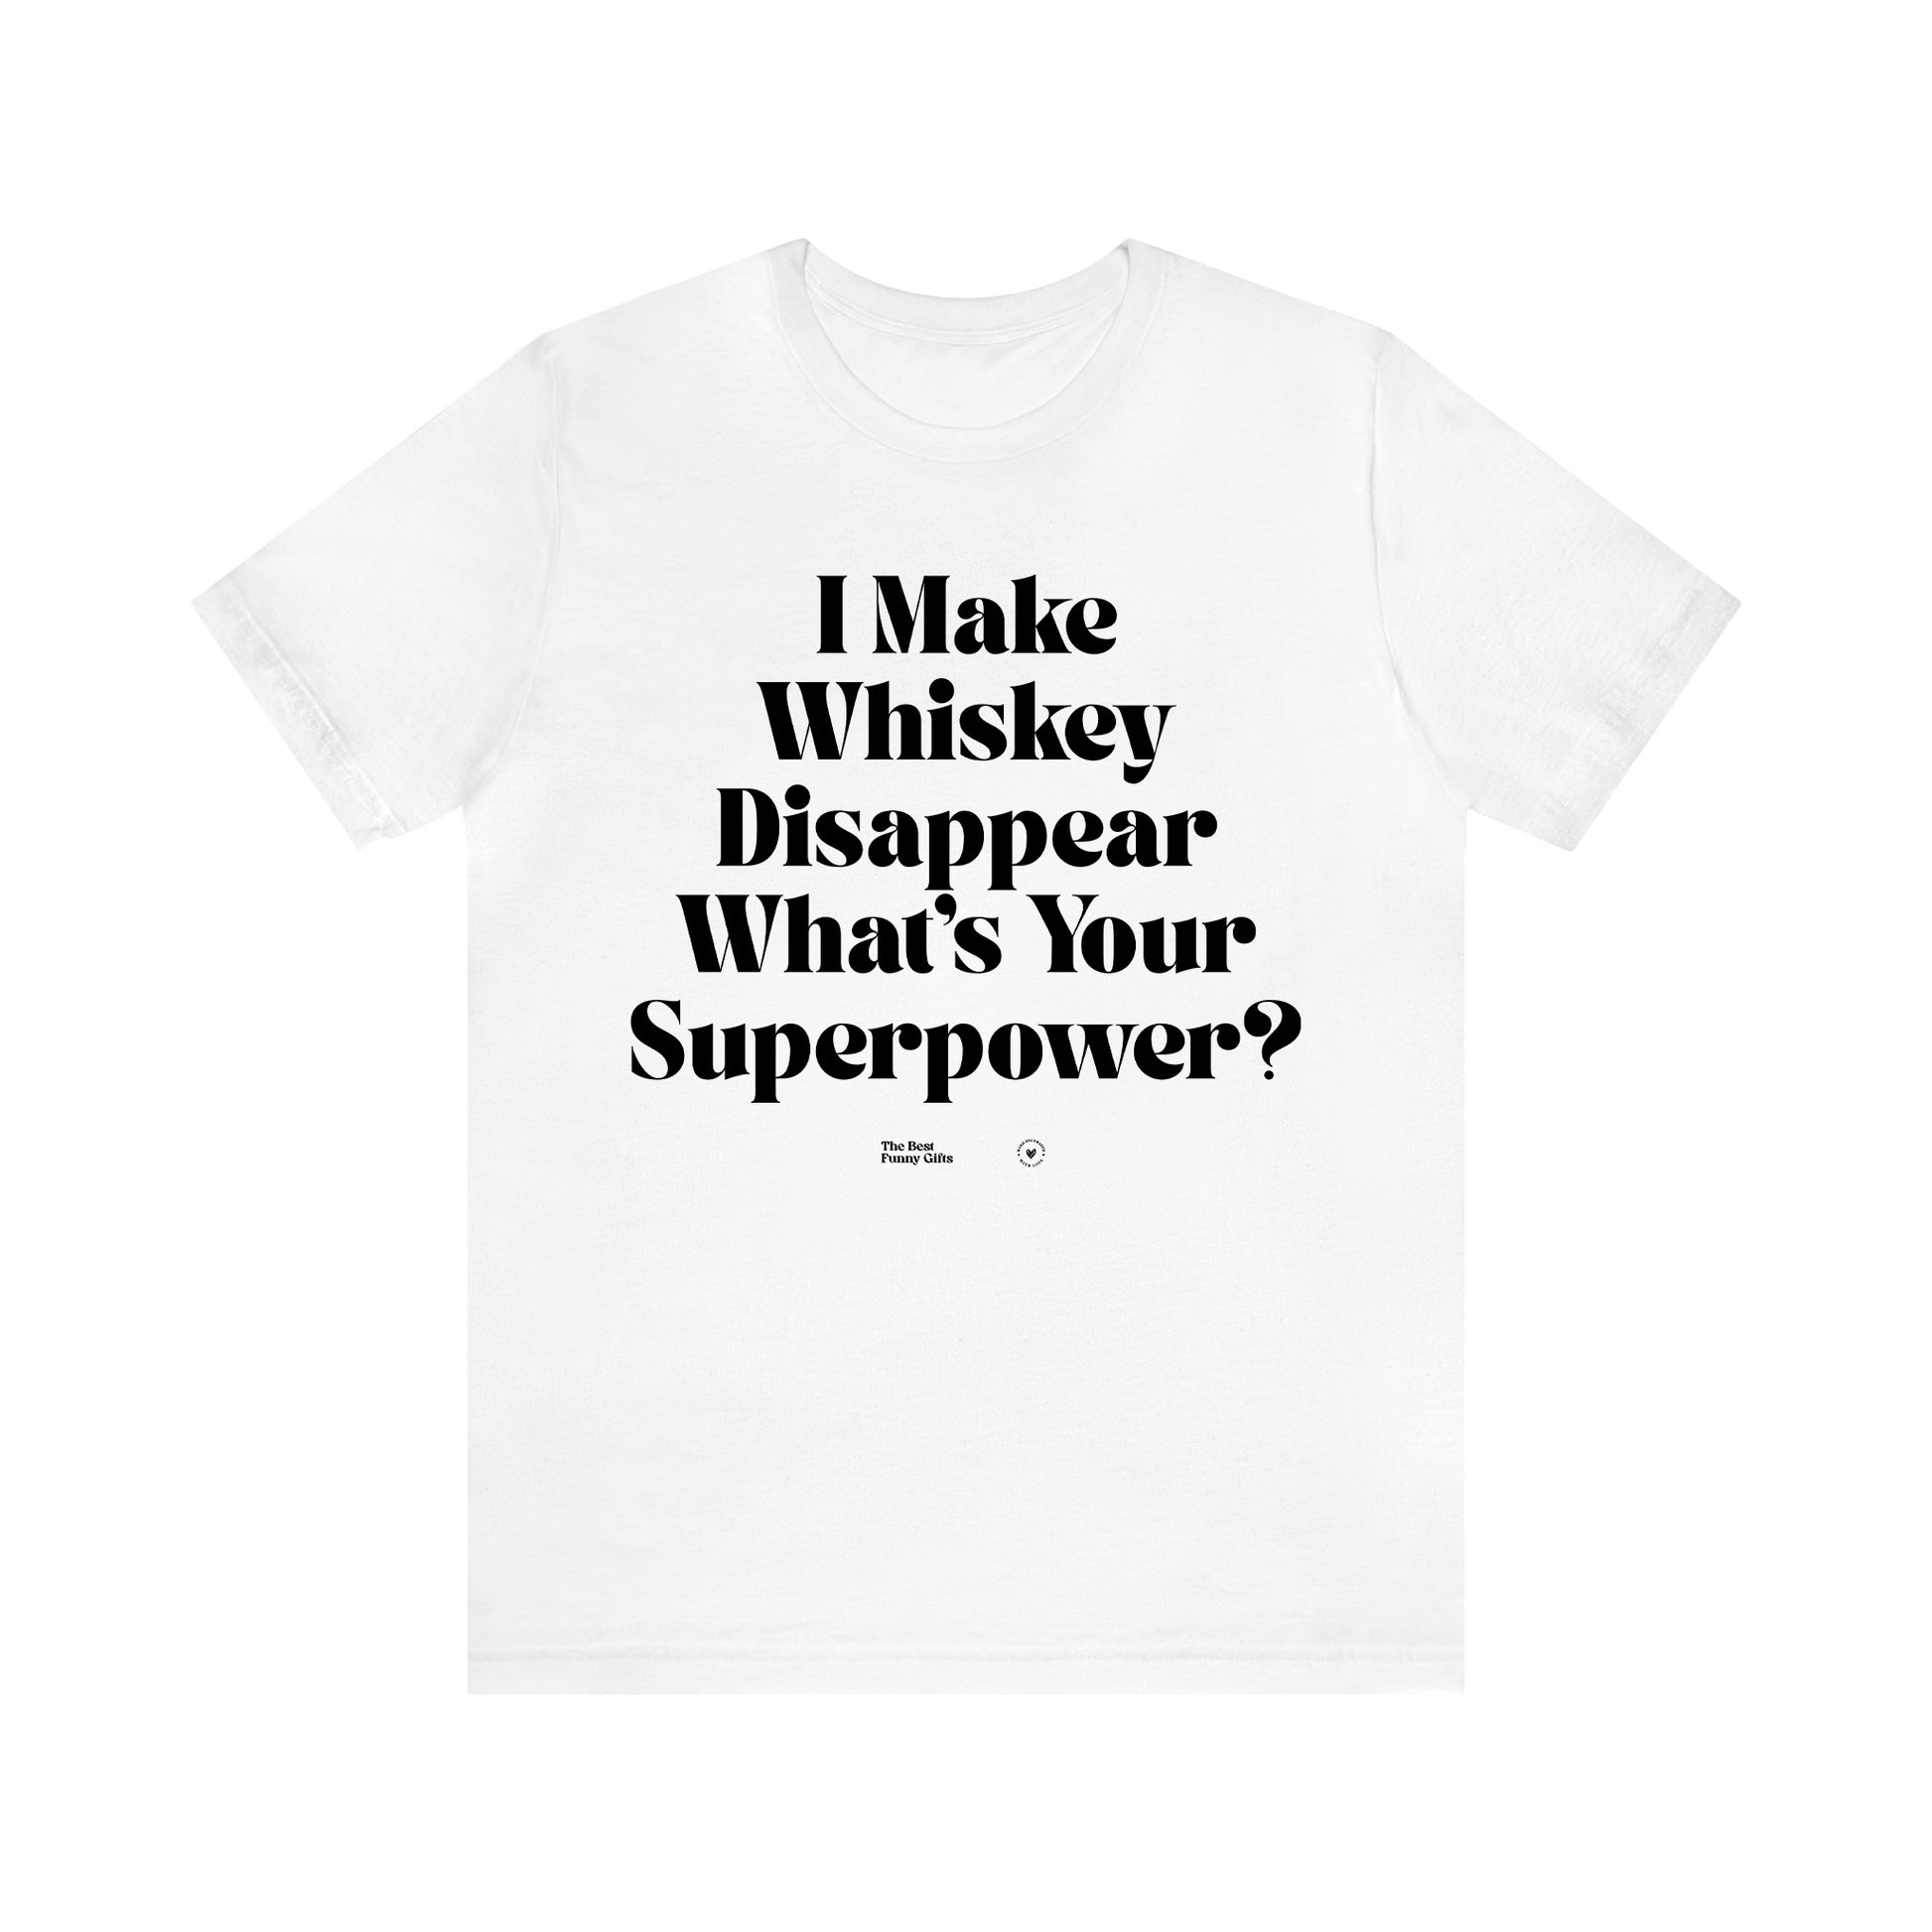 Women's T Shirts I Make Whiskey Disappear What's Your Superpower? - The Best Funny Gifts